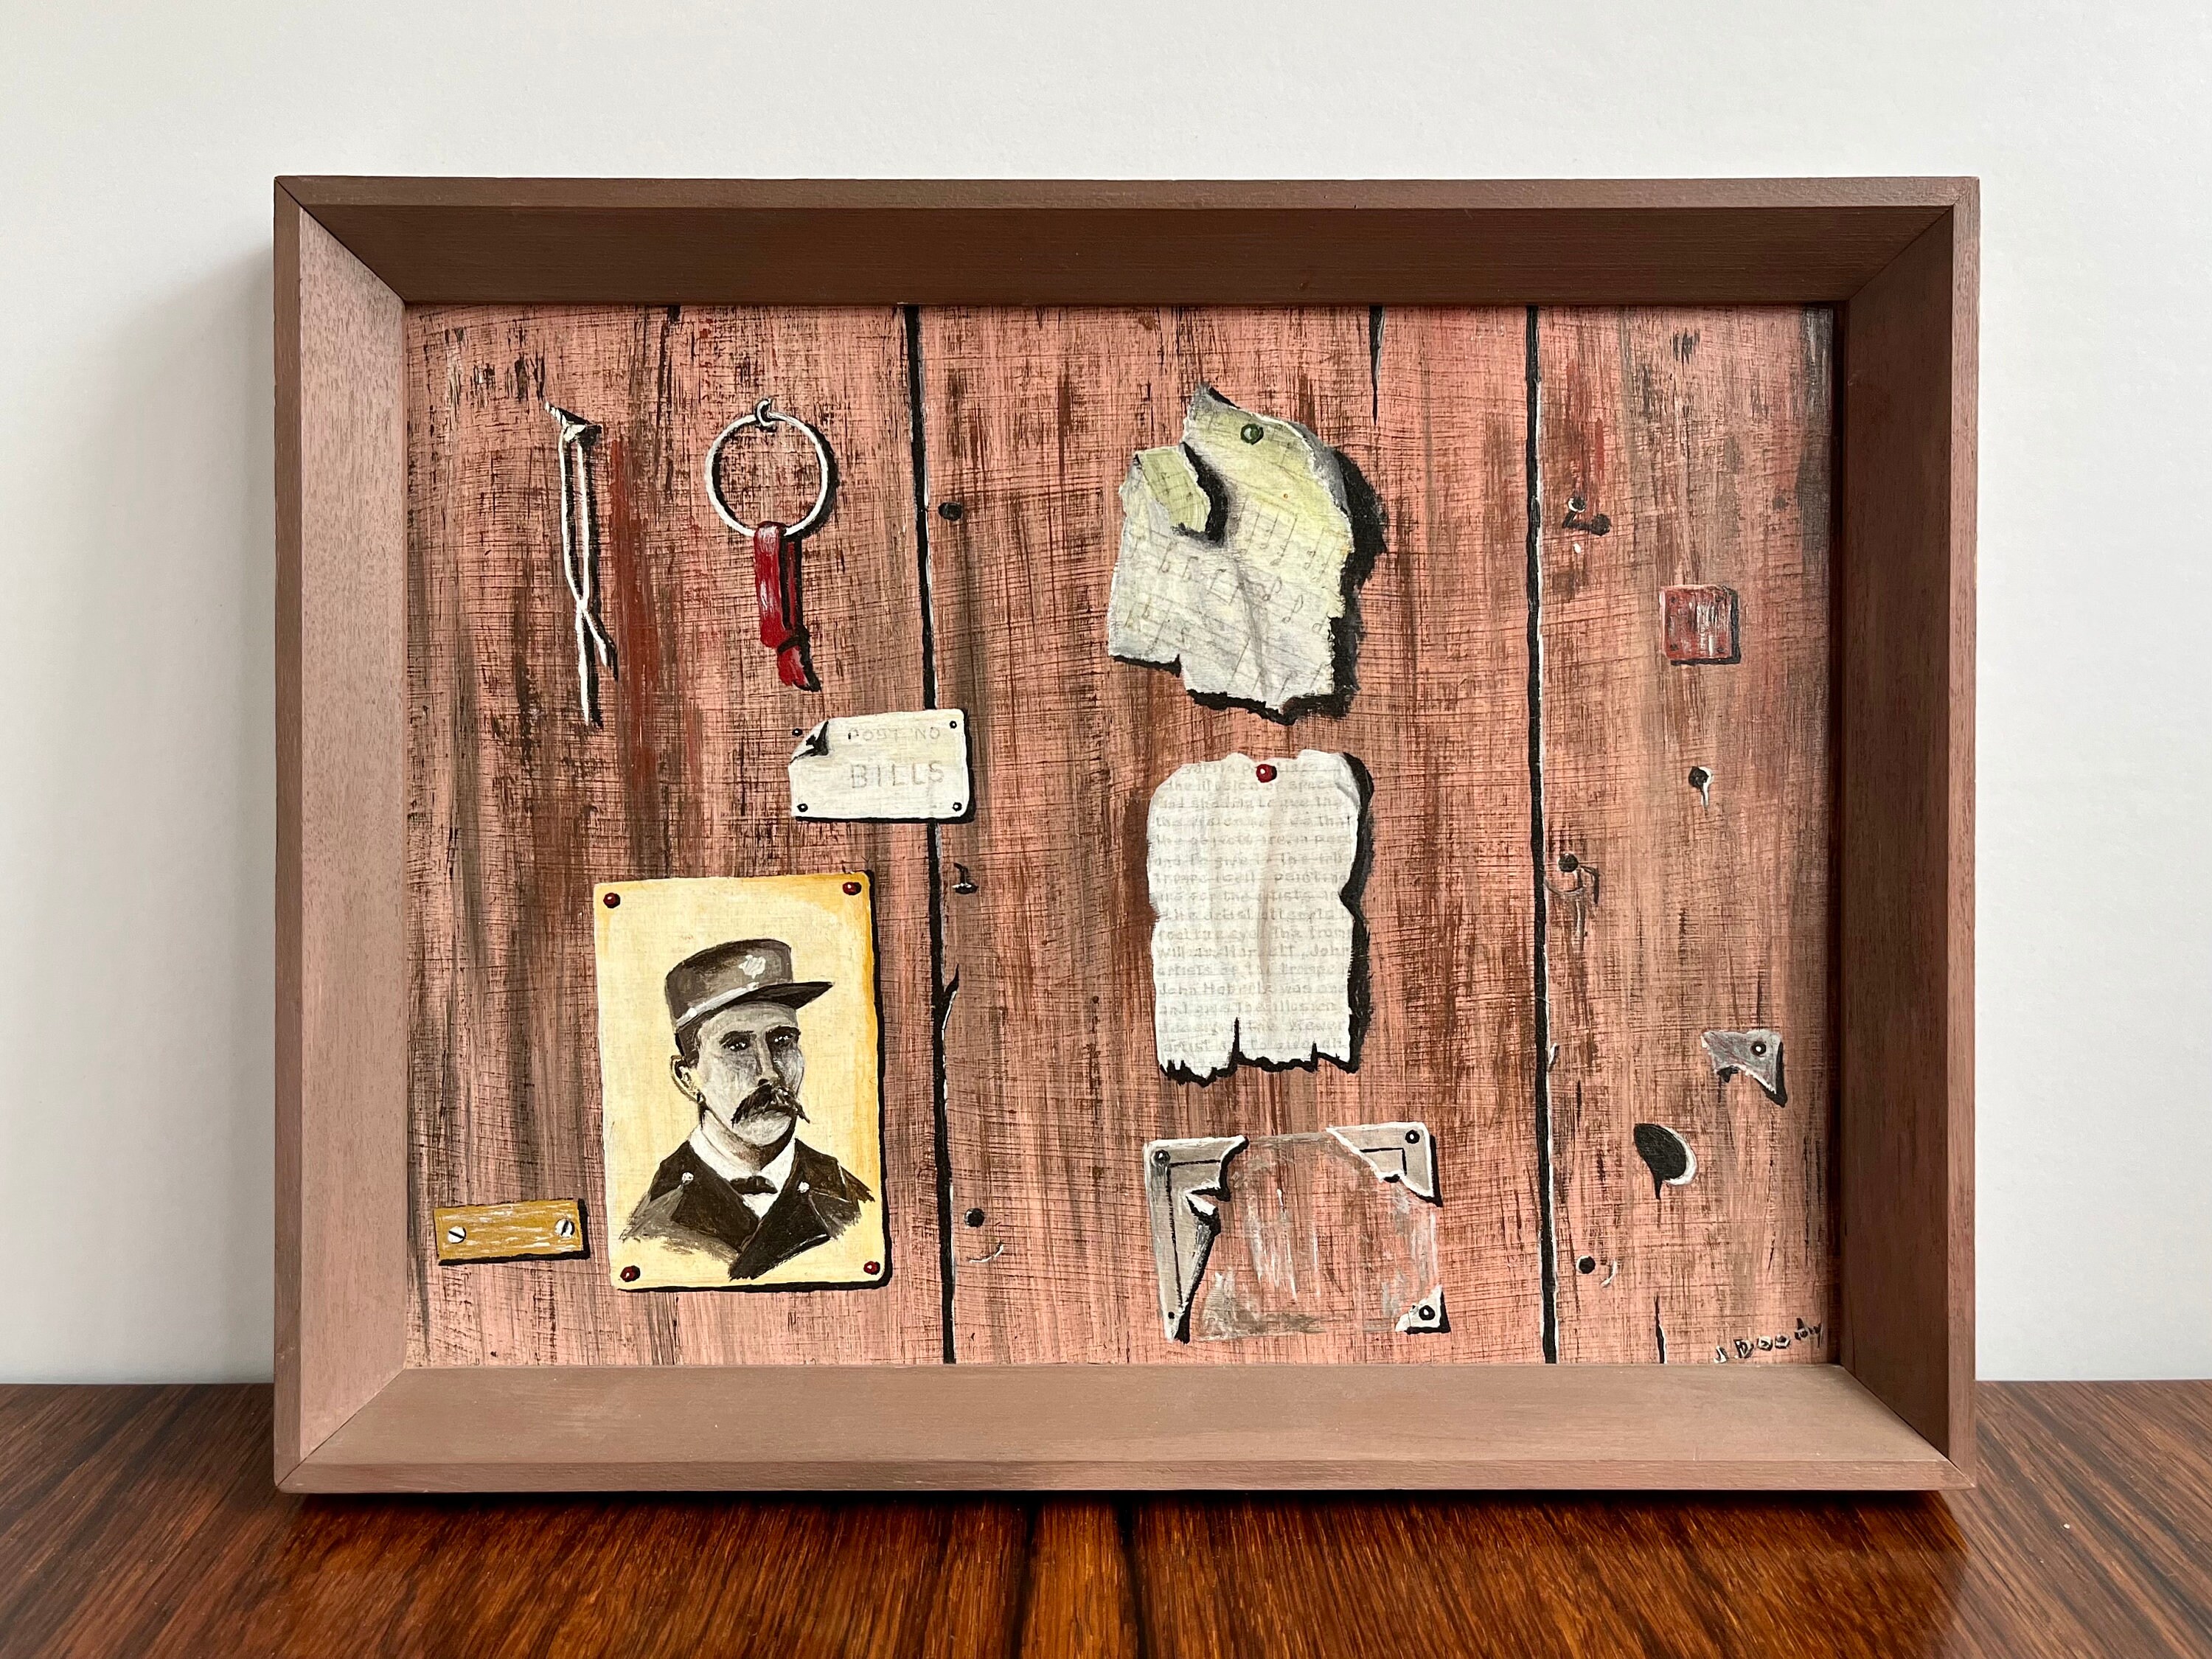 Trompe l'oeil of a Framed Necessary-Board